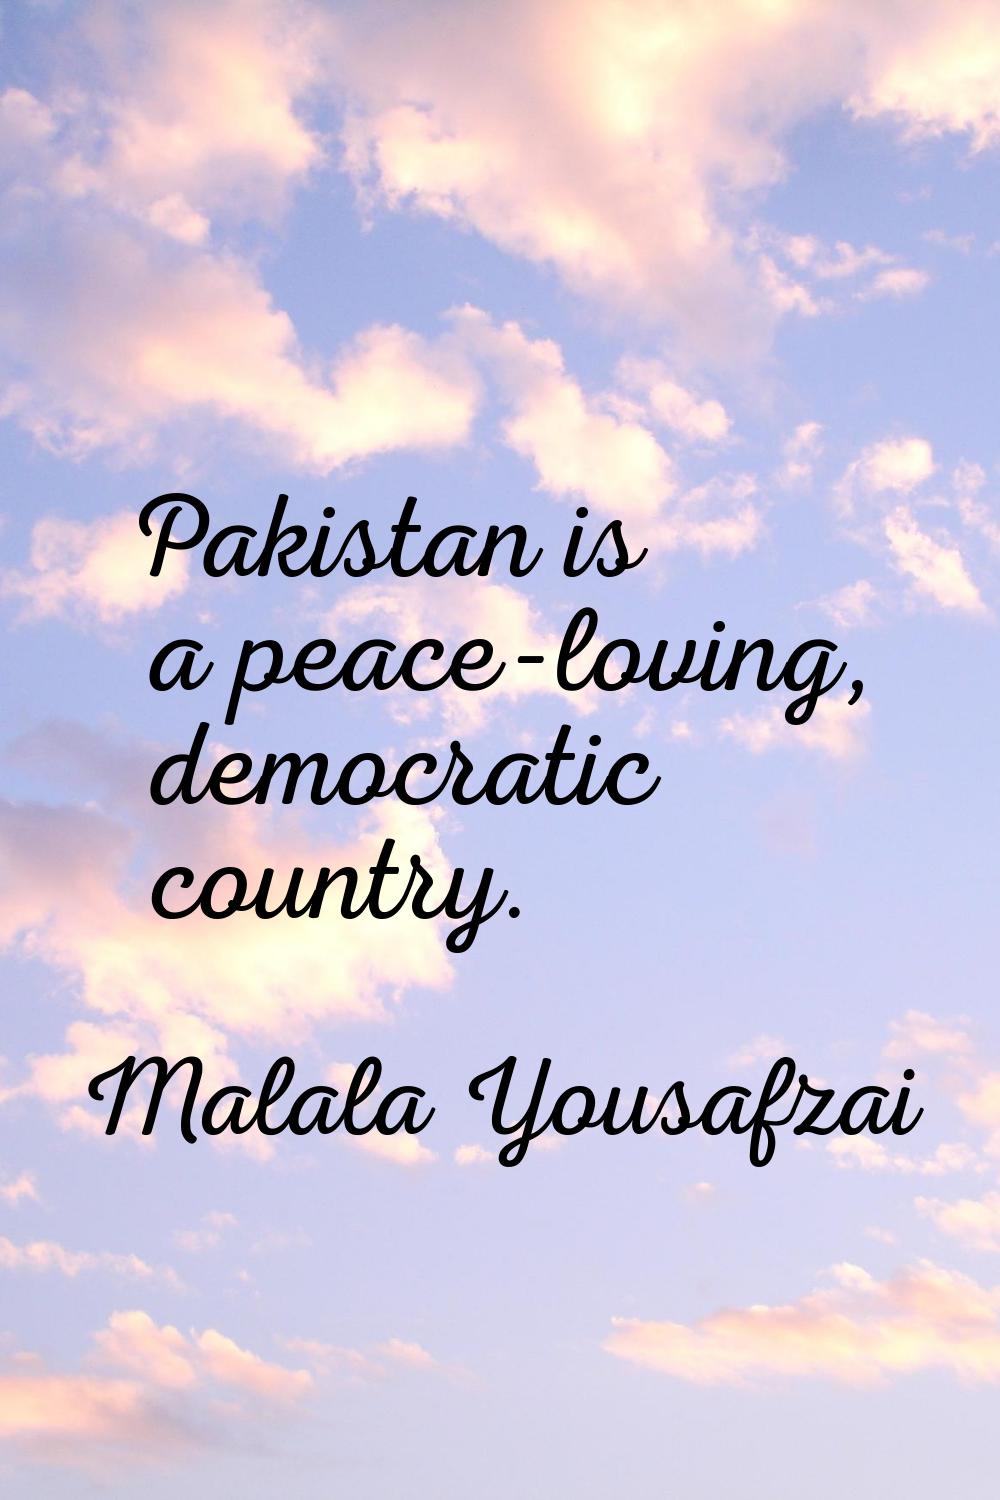 Pakistan is a peace-loving, democratic country.